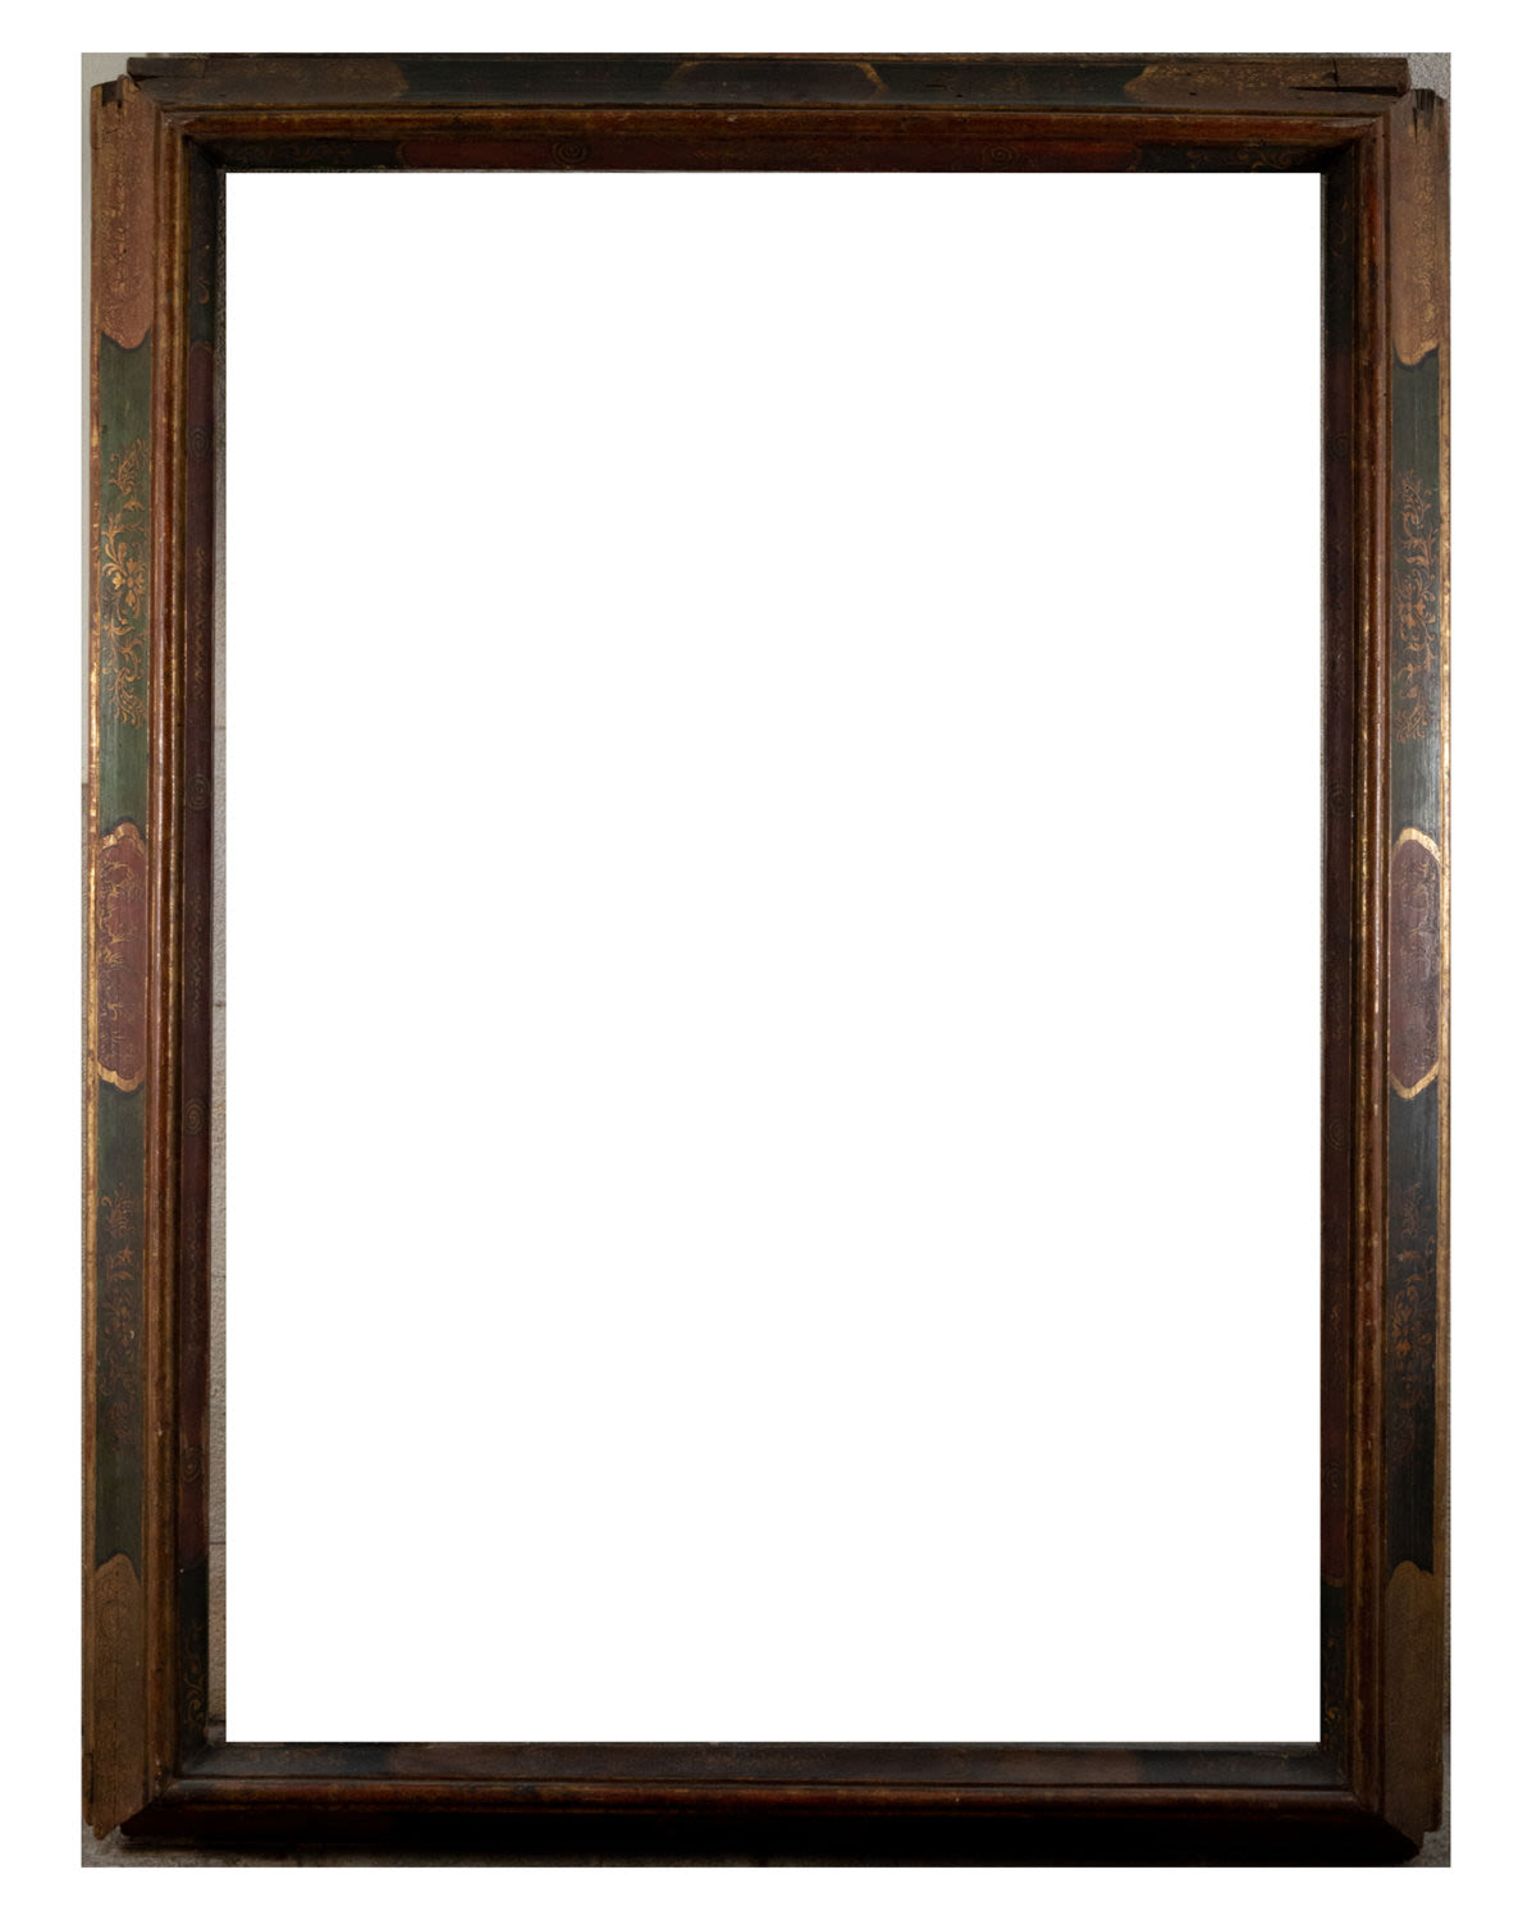 Large period frame in gilded, marbled and polychrome wood, Provenzal France, 17th century